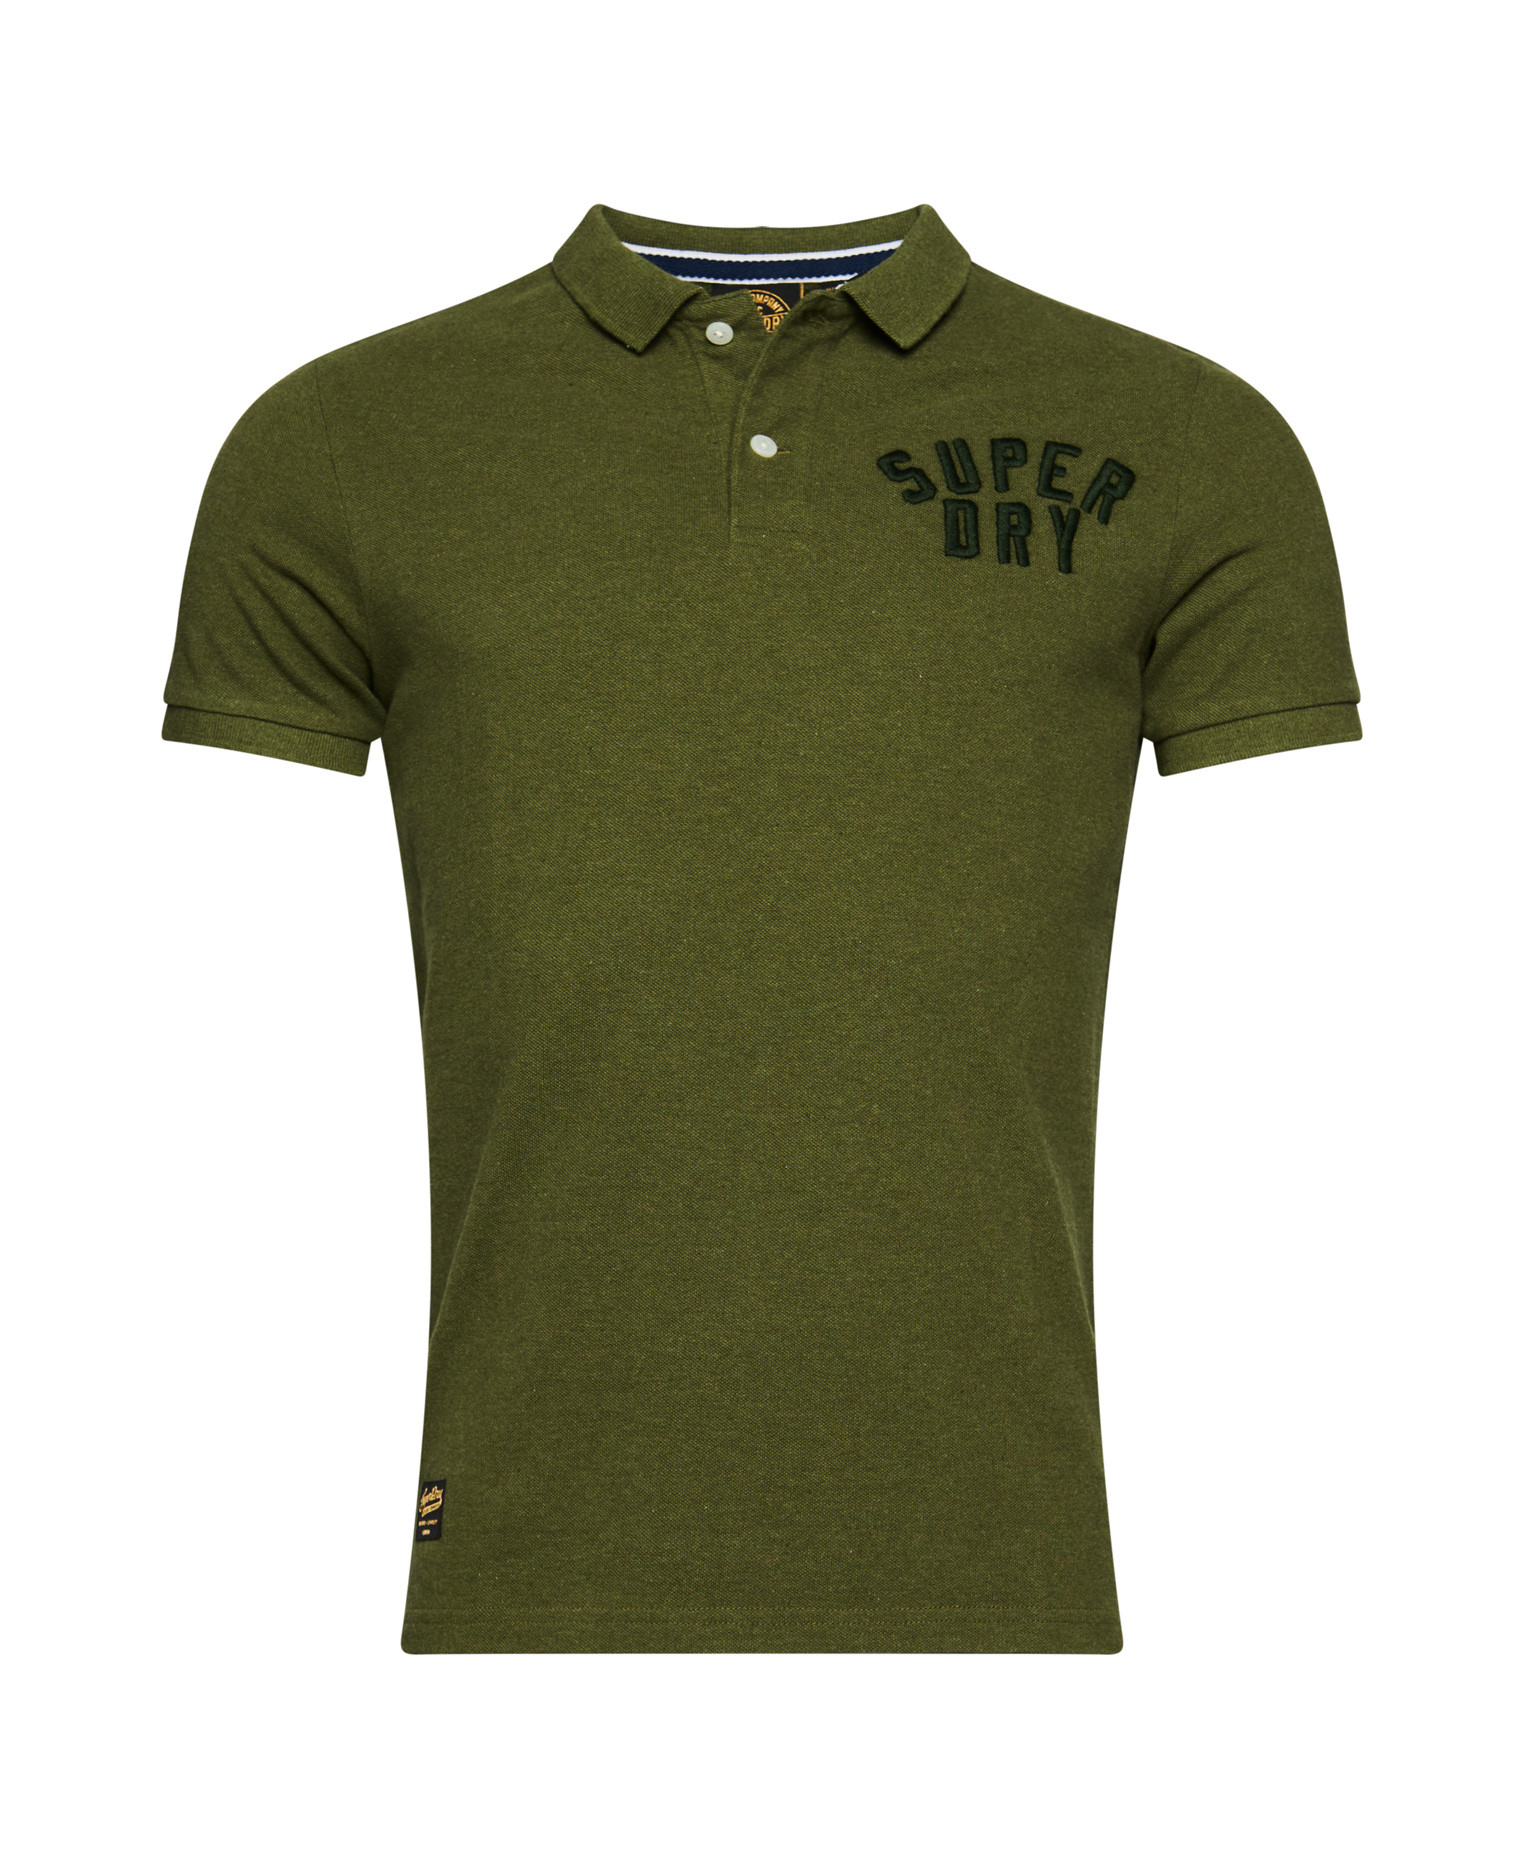 Superdry - Cotton piqué polo shirt with logo, Green, large image number 0